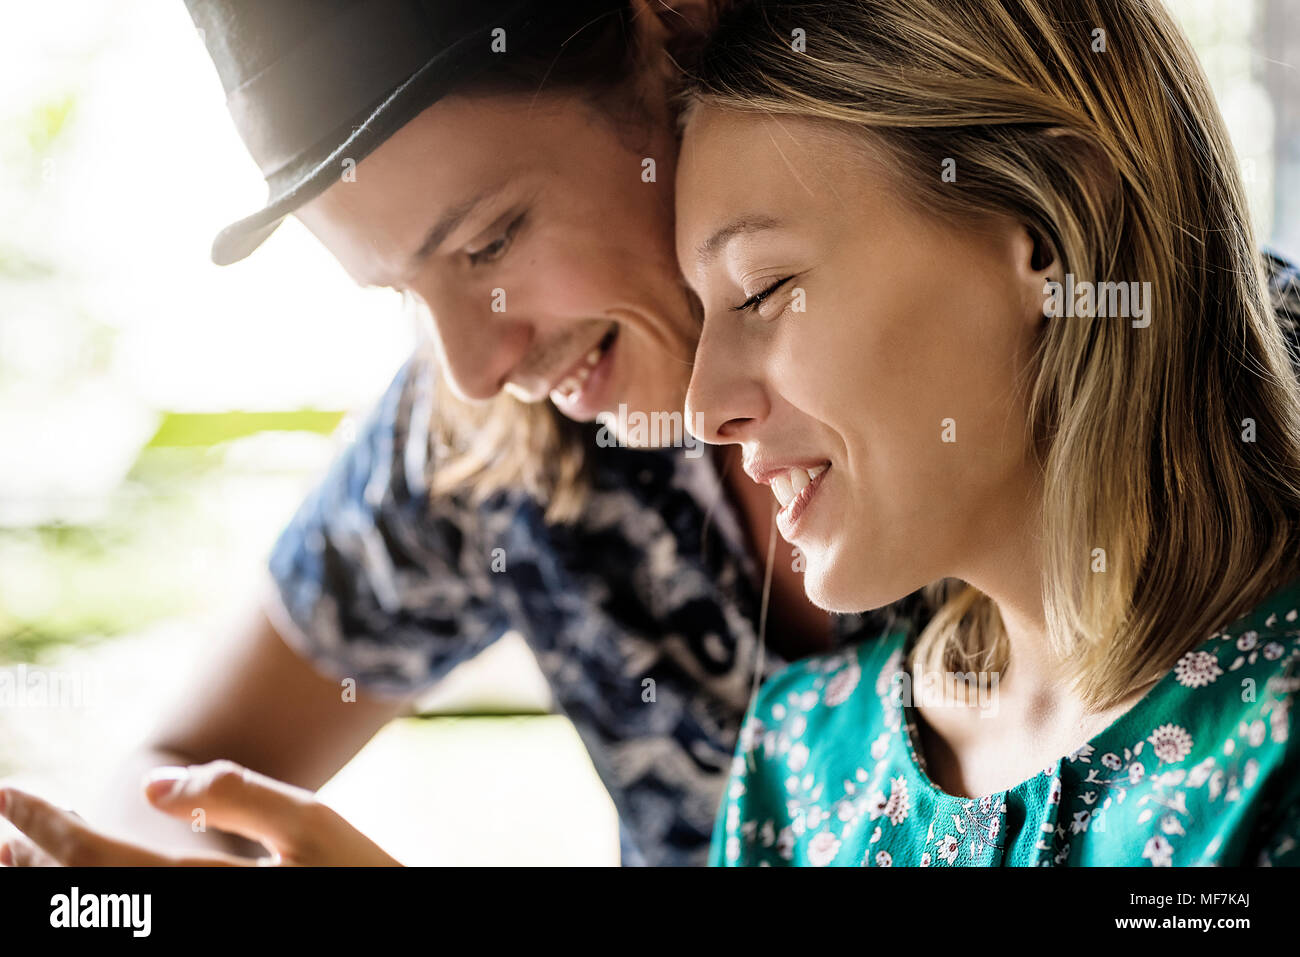 Artist couple sitting in cafe and checking the young woman's Stock Photo